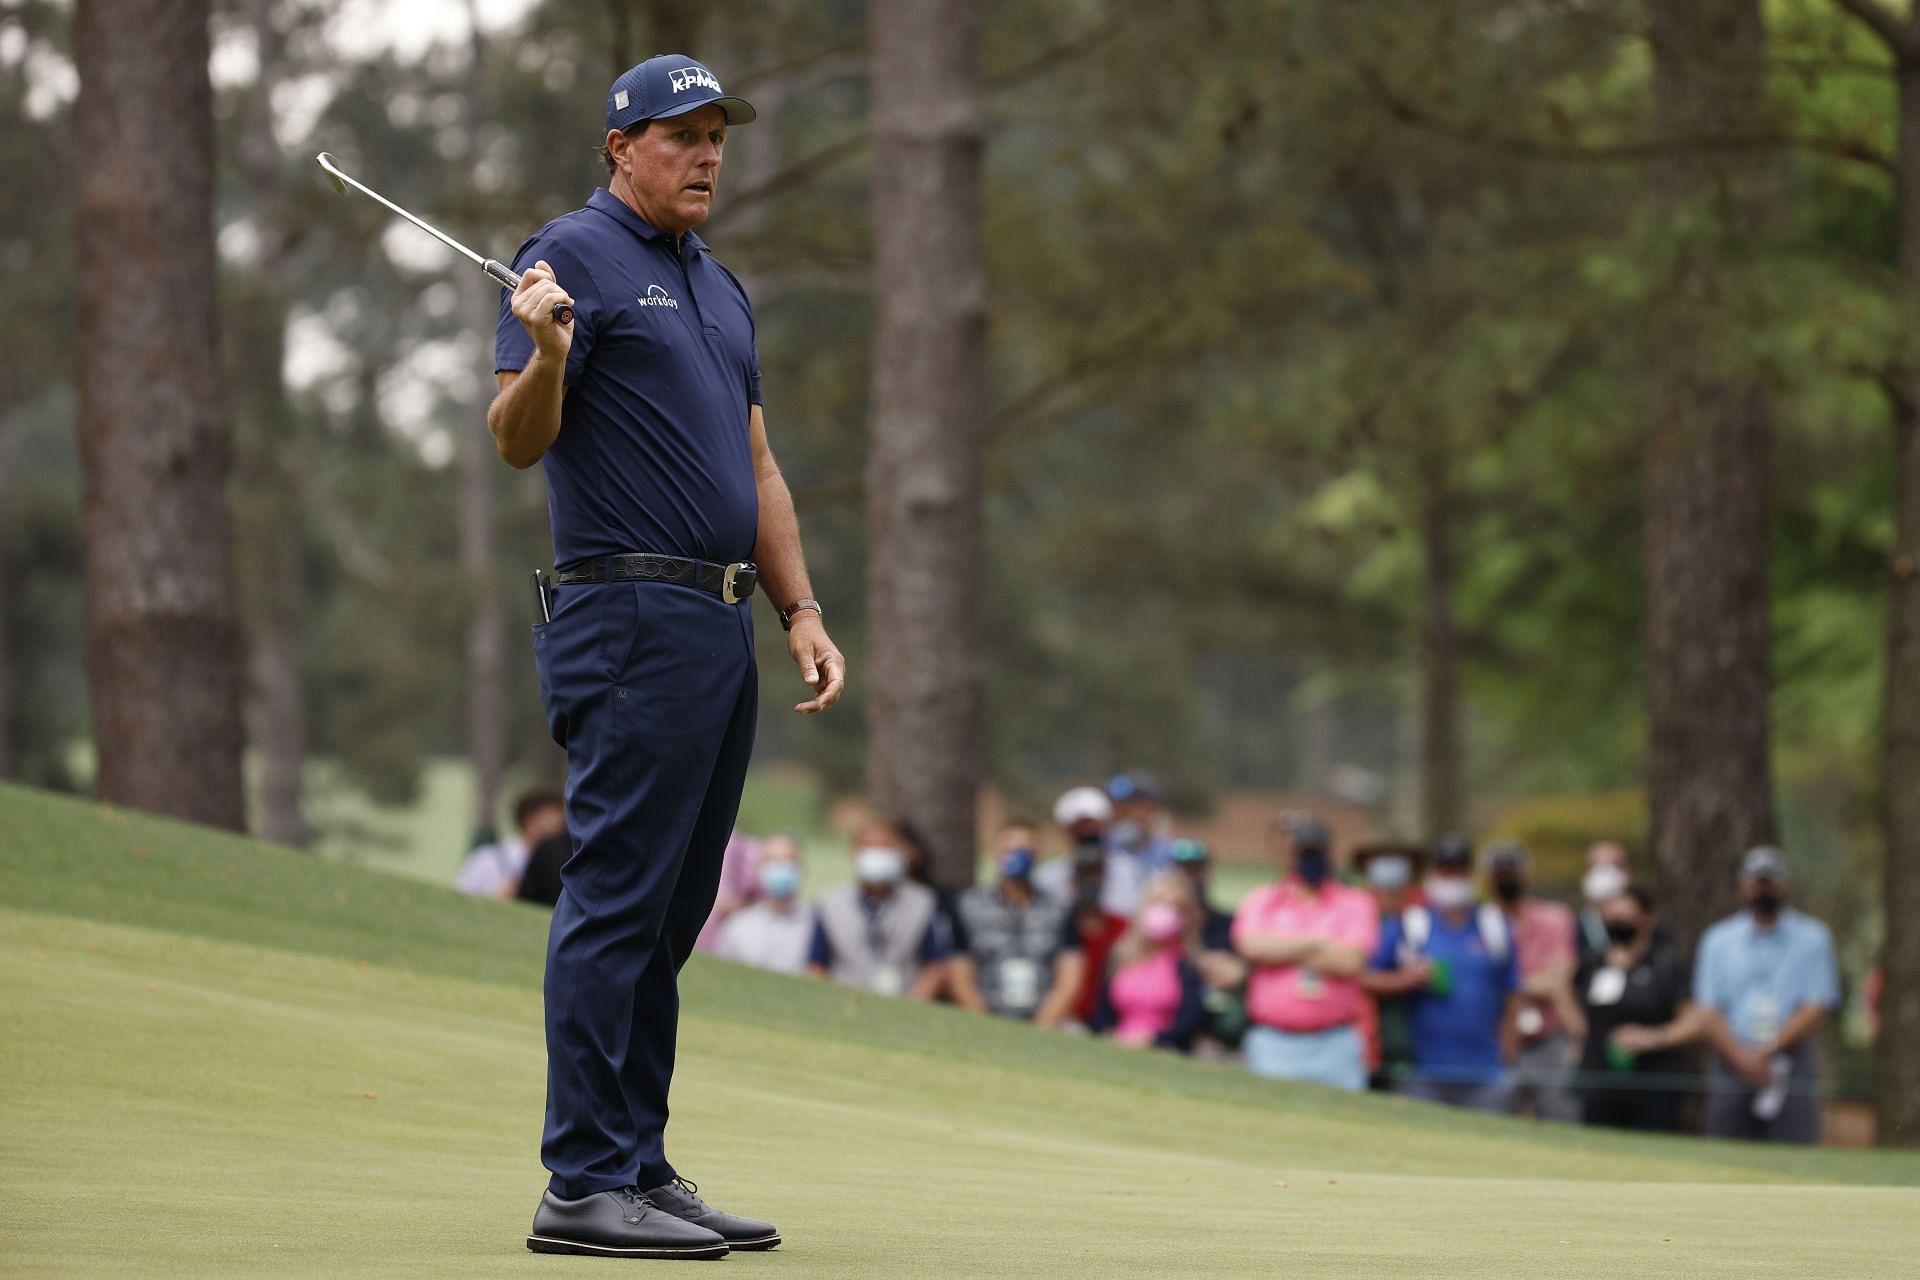 Phil Mickelson at The 2021 Masters - Round Three (Image via Jared C. Tilton/Getty Images)